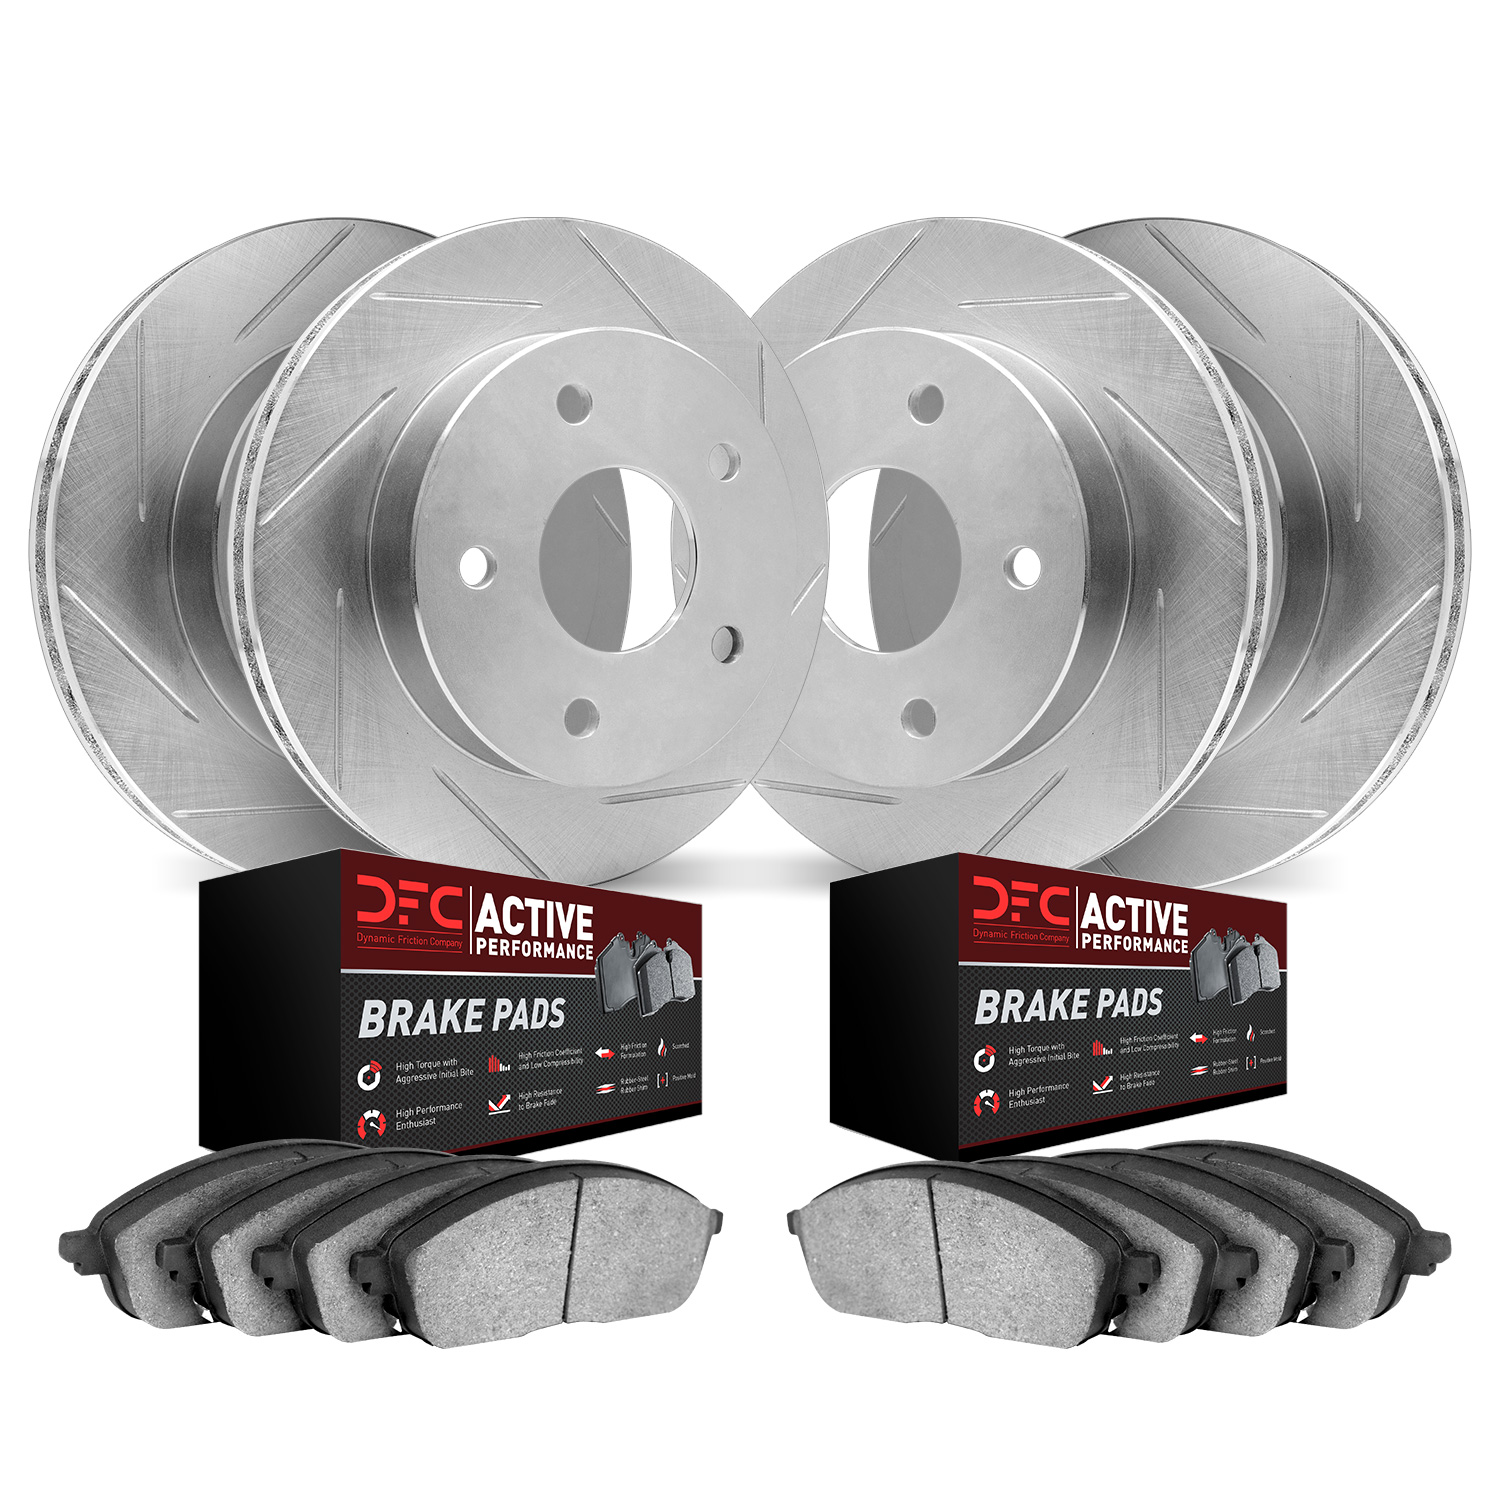 2704-76000 Geoperformance Slotted Brake Rotors with Active Performance Pads Kits, 1993-1998 Lexus/Toyota/Scion, Position: Front